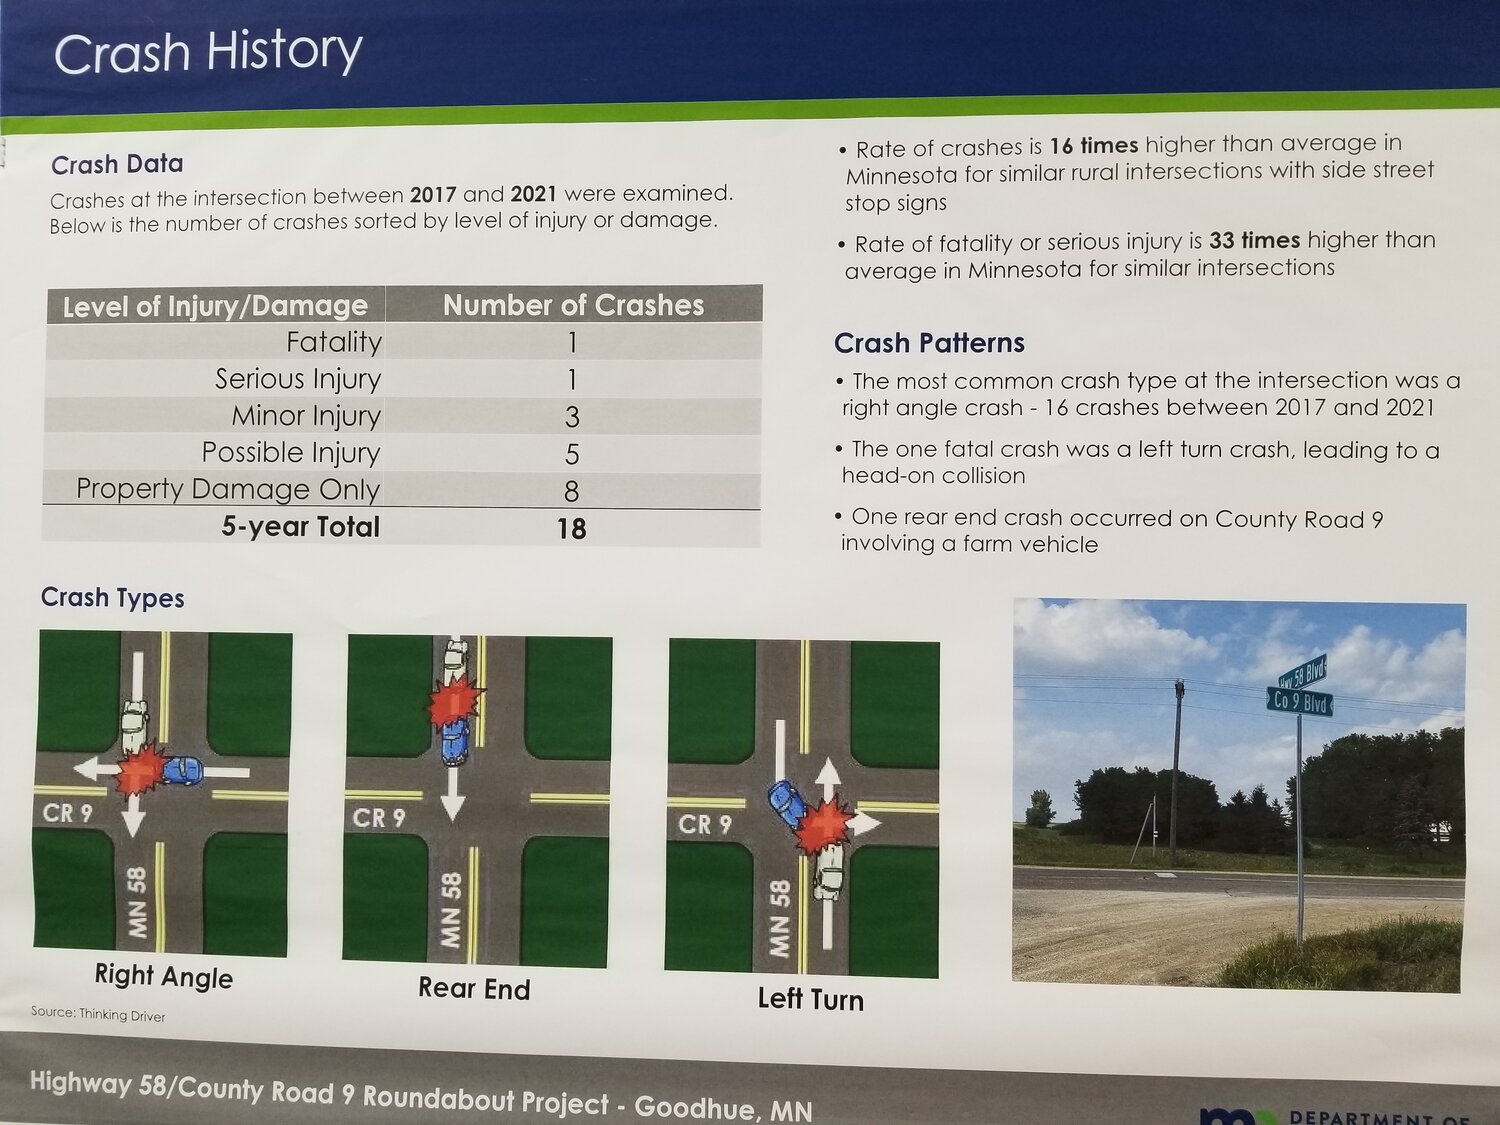 An informational poster summarizes accident history between 2017 and 2021 noting that the rate is 16 times higher than average.